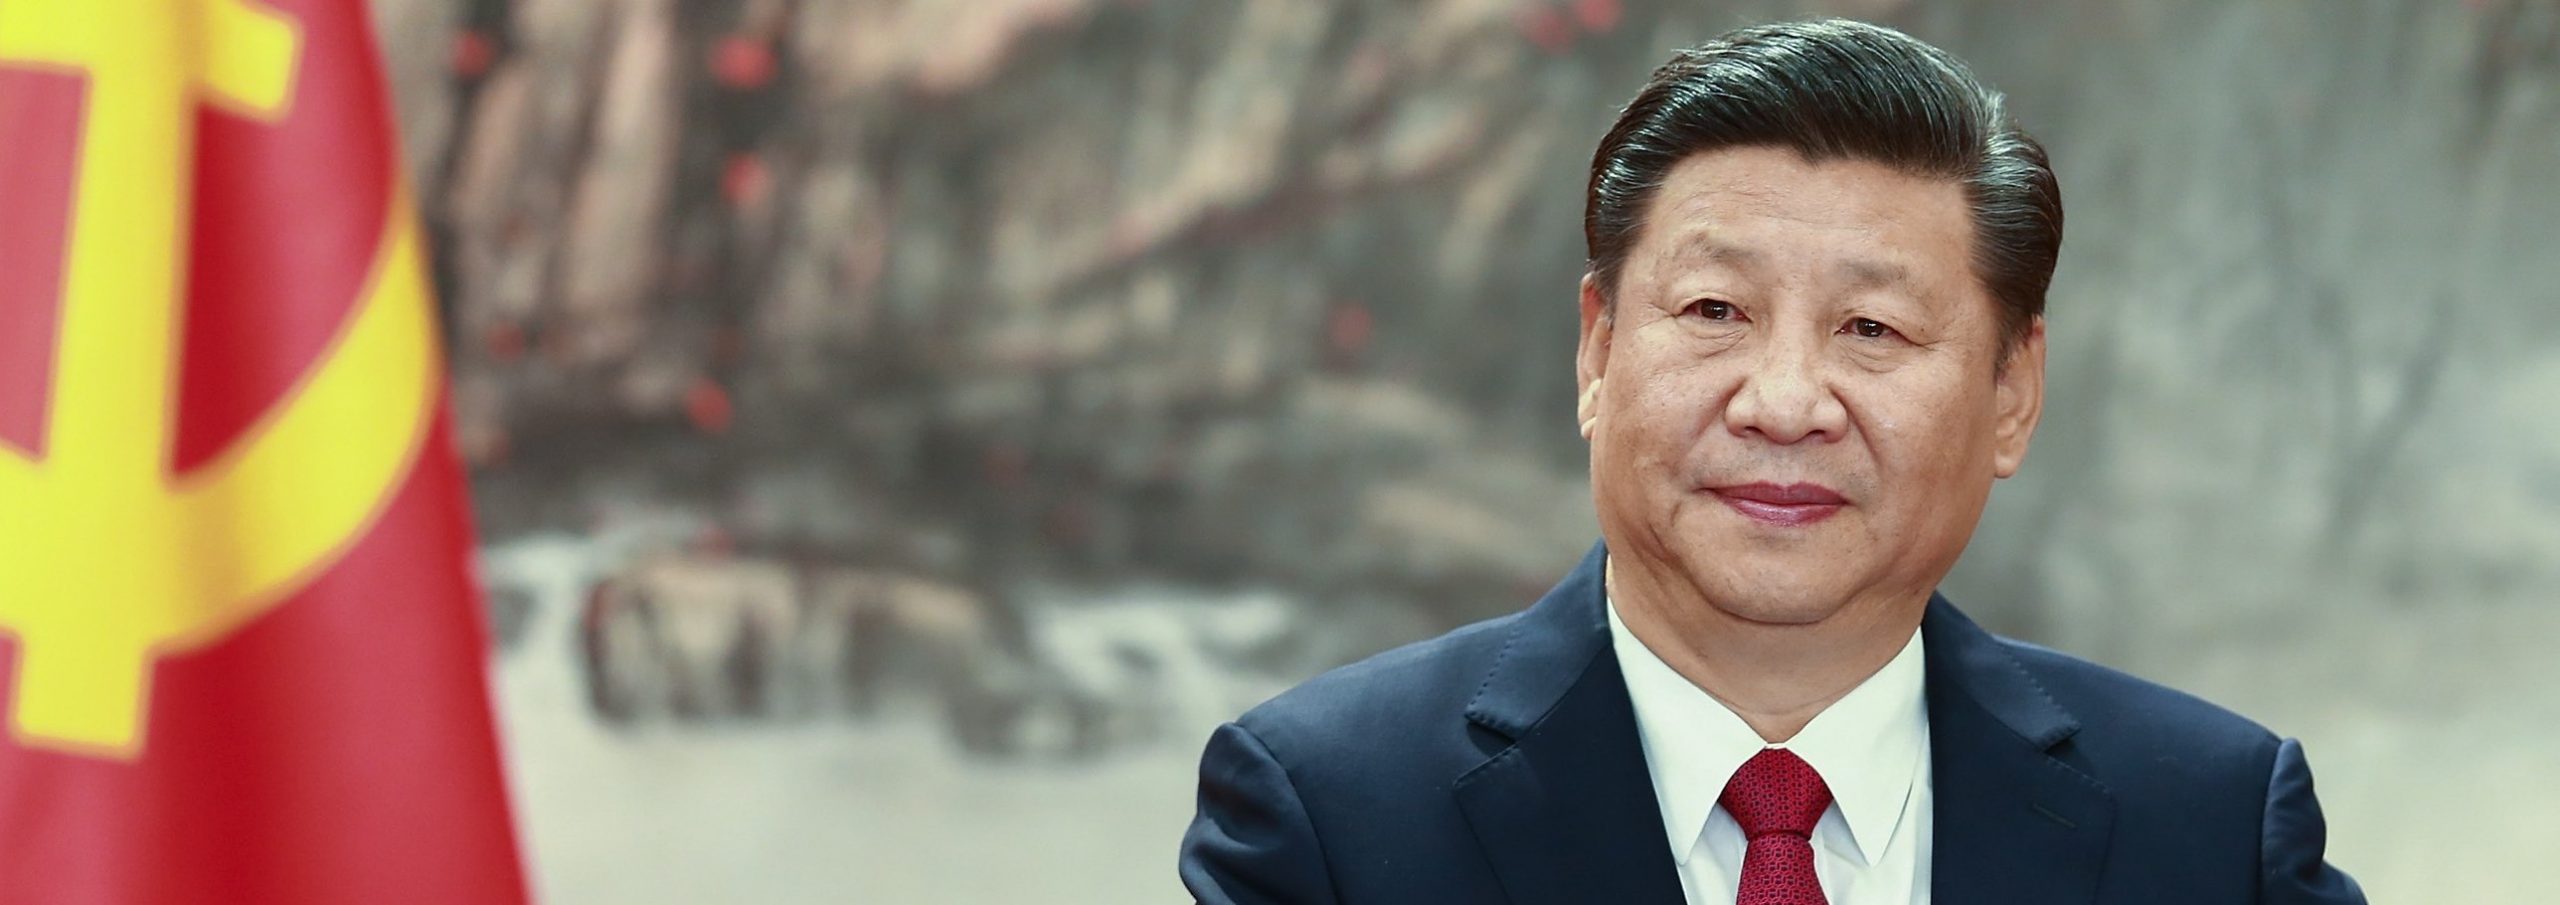 Le président chinois Xi Jinping. (Source : Lowy Institute)